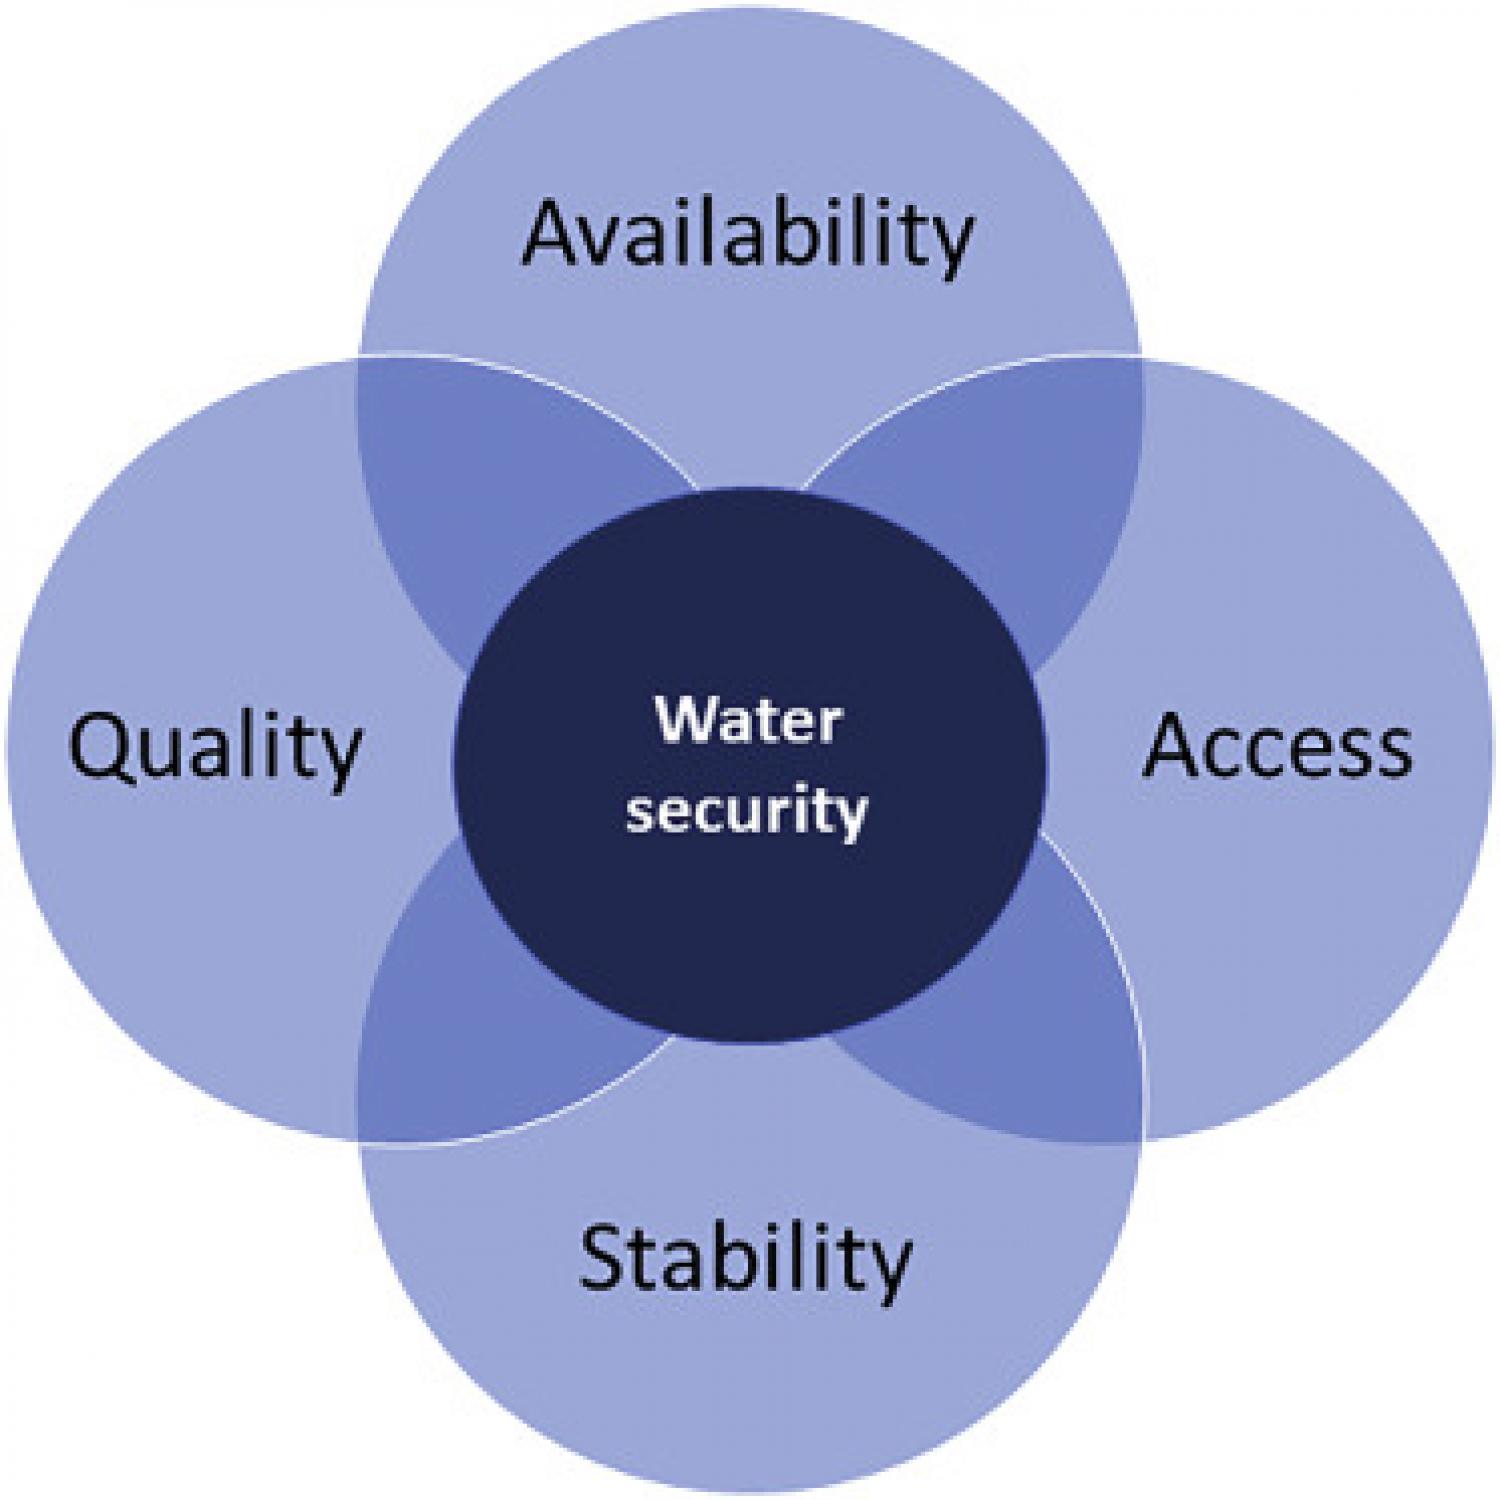 Figure showing the conceptualization of water security